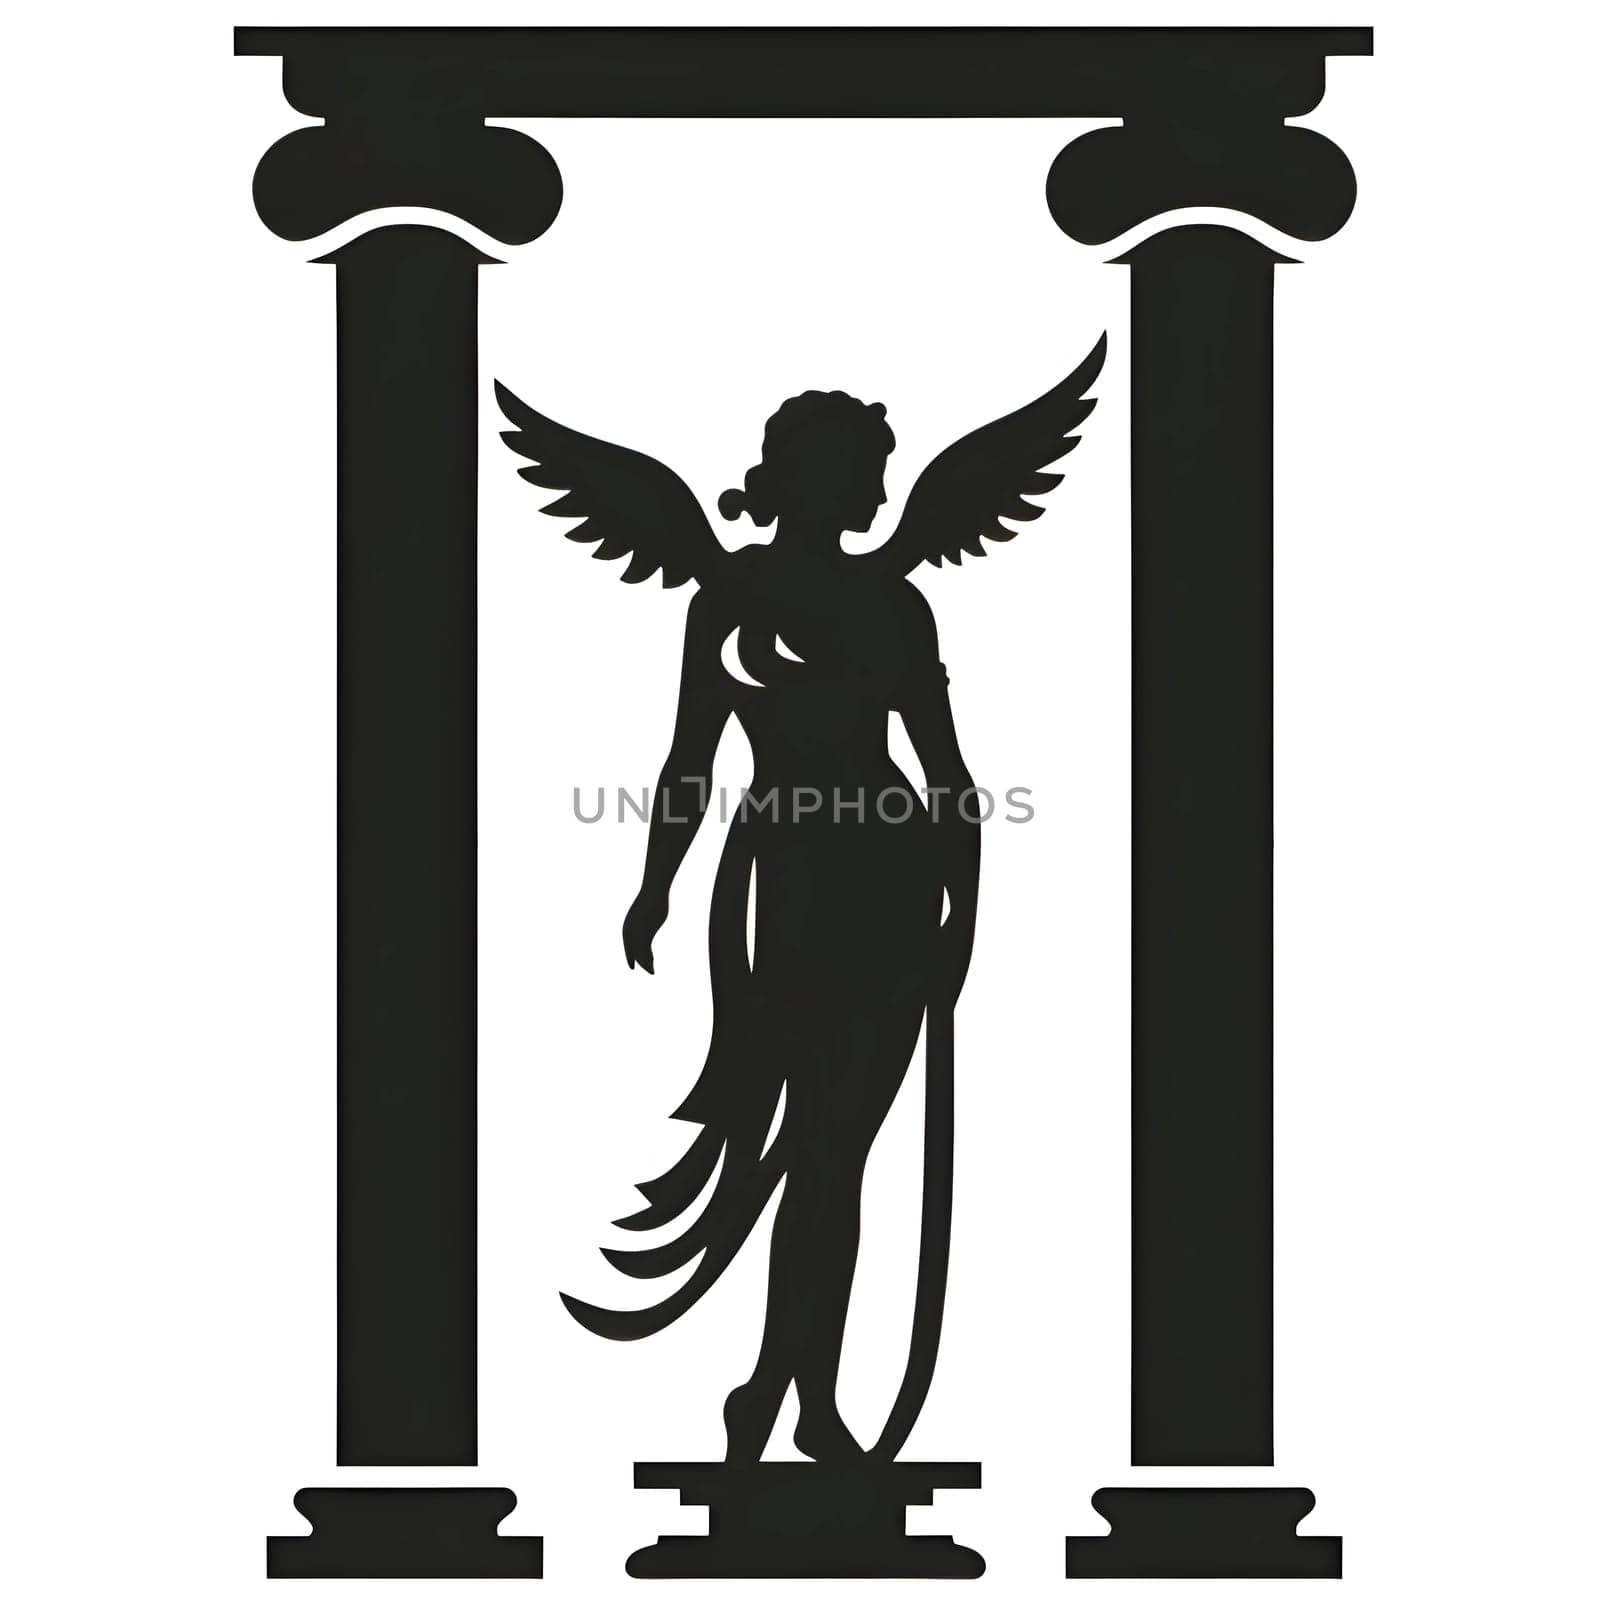 Vector illustration of a women between the pillars in black silhouette against a clean white background, capturing graceful forms.